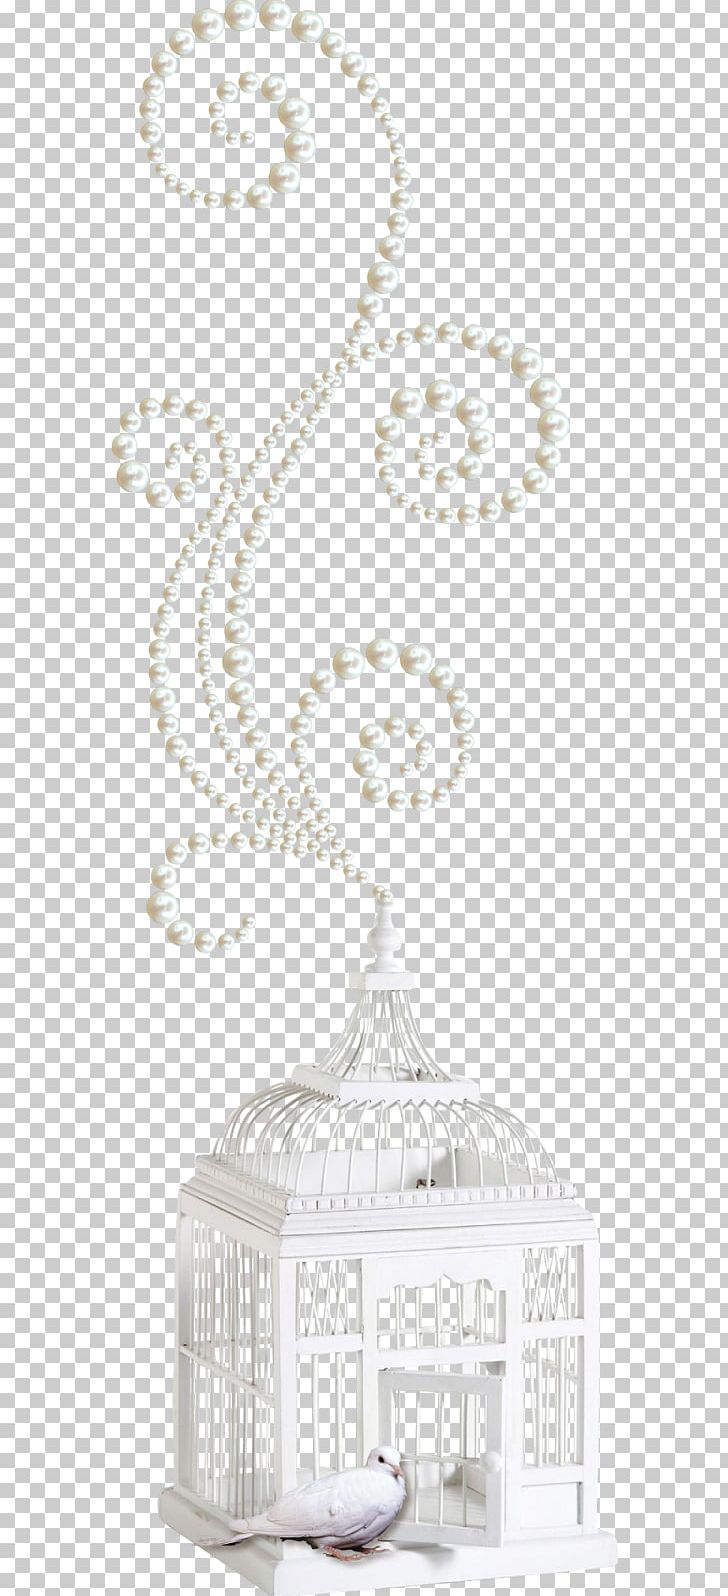 Embroidery Bead Motif Textile Pattern PNG, Clipart, Art, Bead, Cake Stand, Candle Holder, Canutillo Free PNG Download